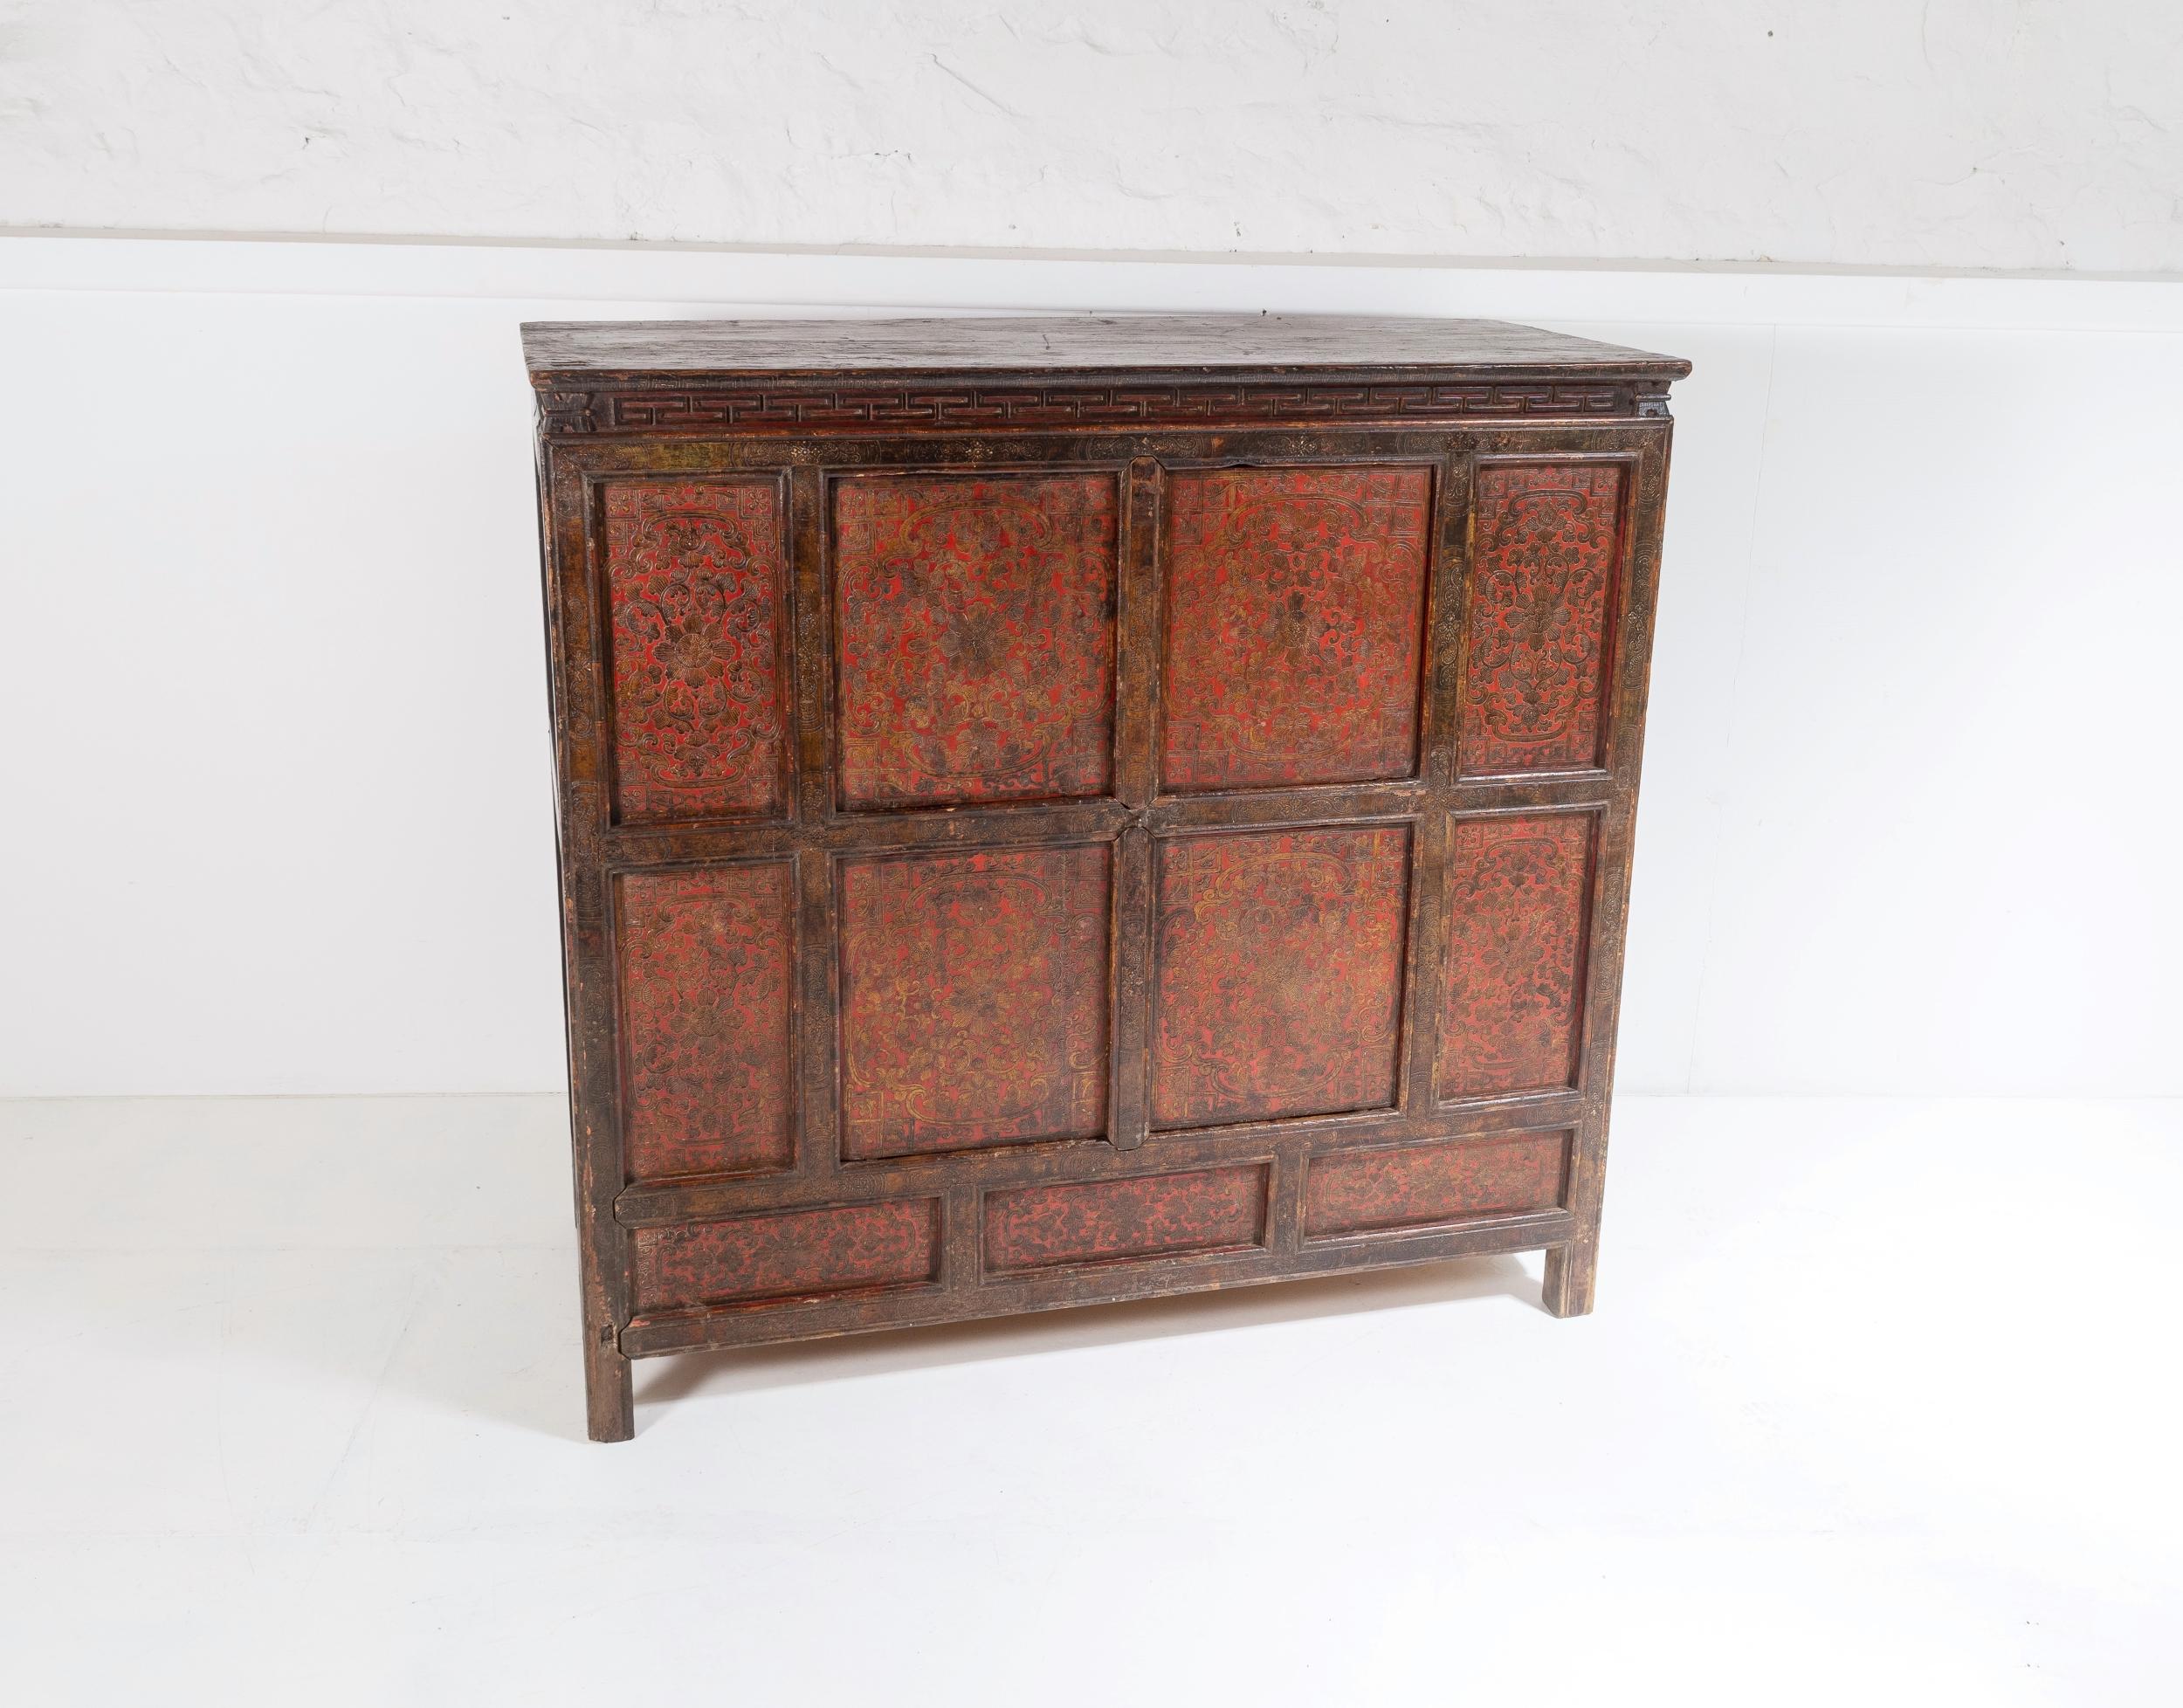 19th century Chinese Tibetan hand painted storage cupboard with original centre opening doors. A superb characterful piece in original lacquered paint with decorative floral tribal patterns. Hand carved detailing to the front.
A large deep cupboard